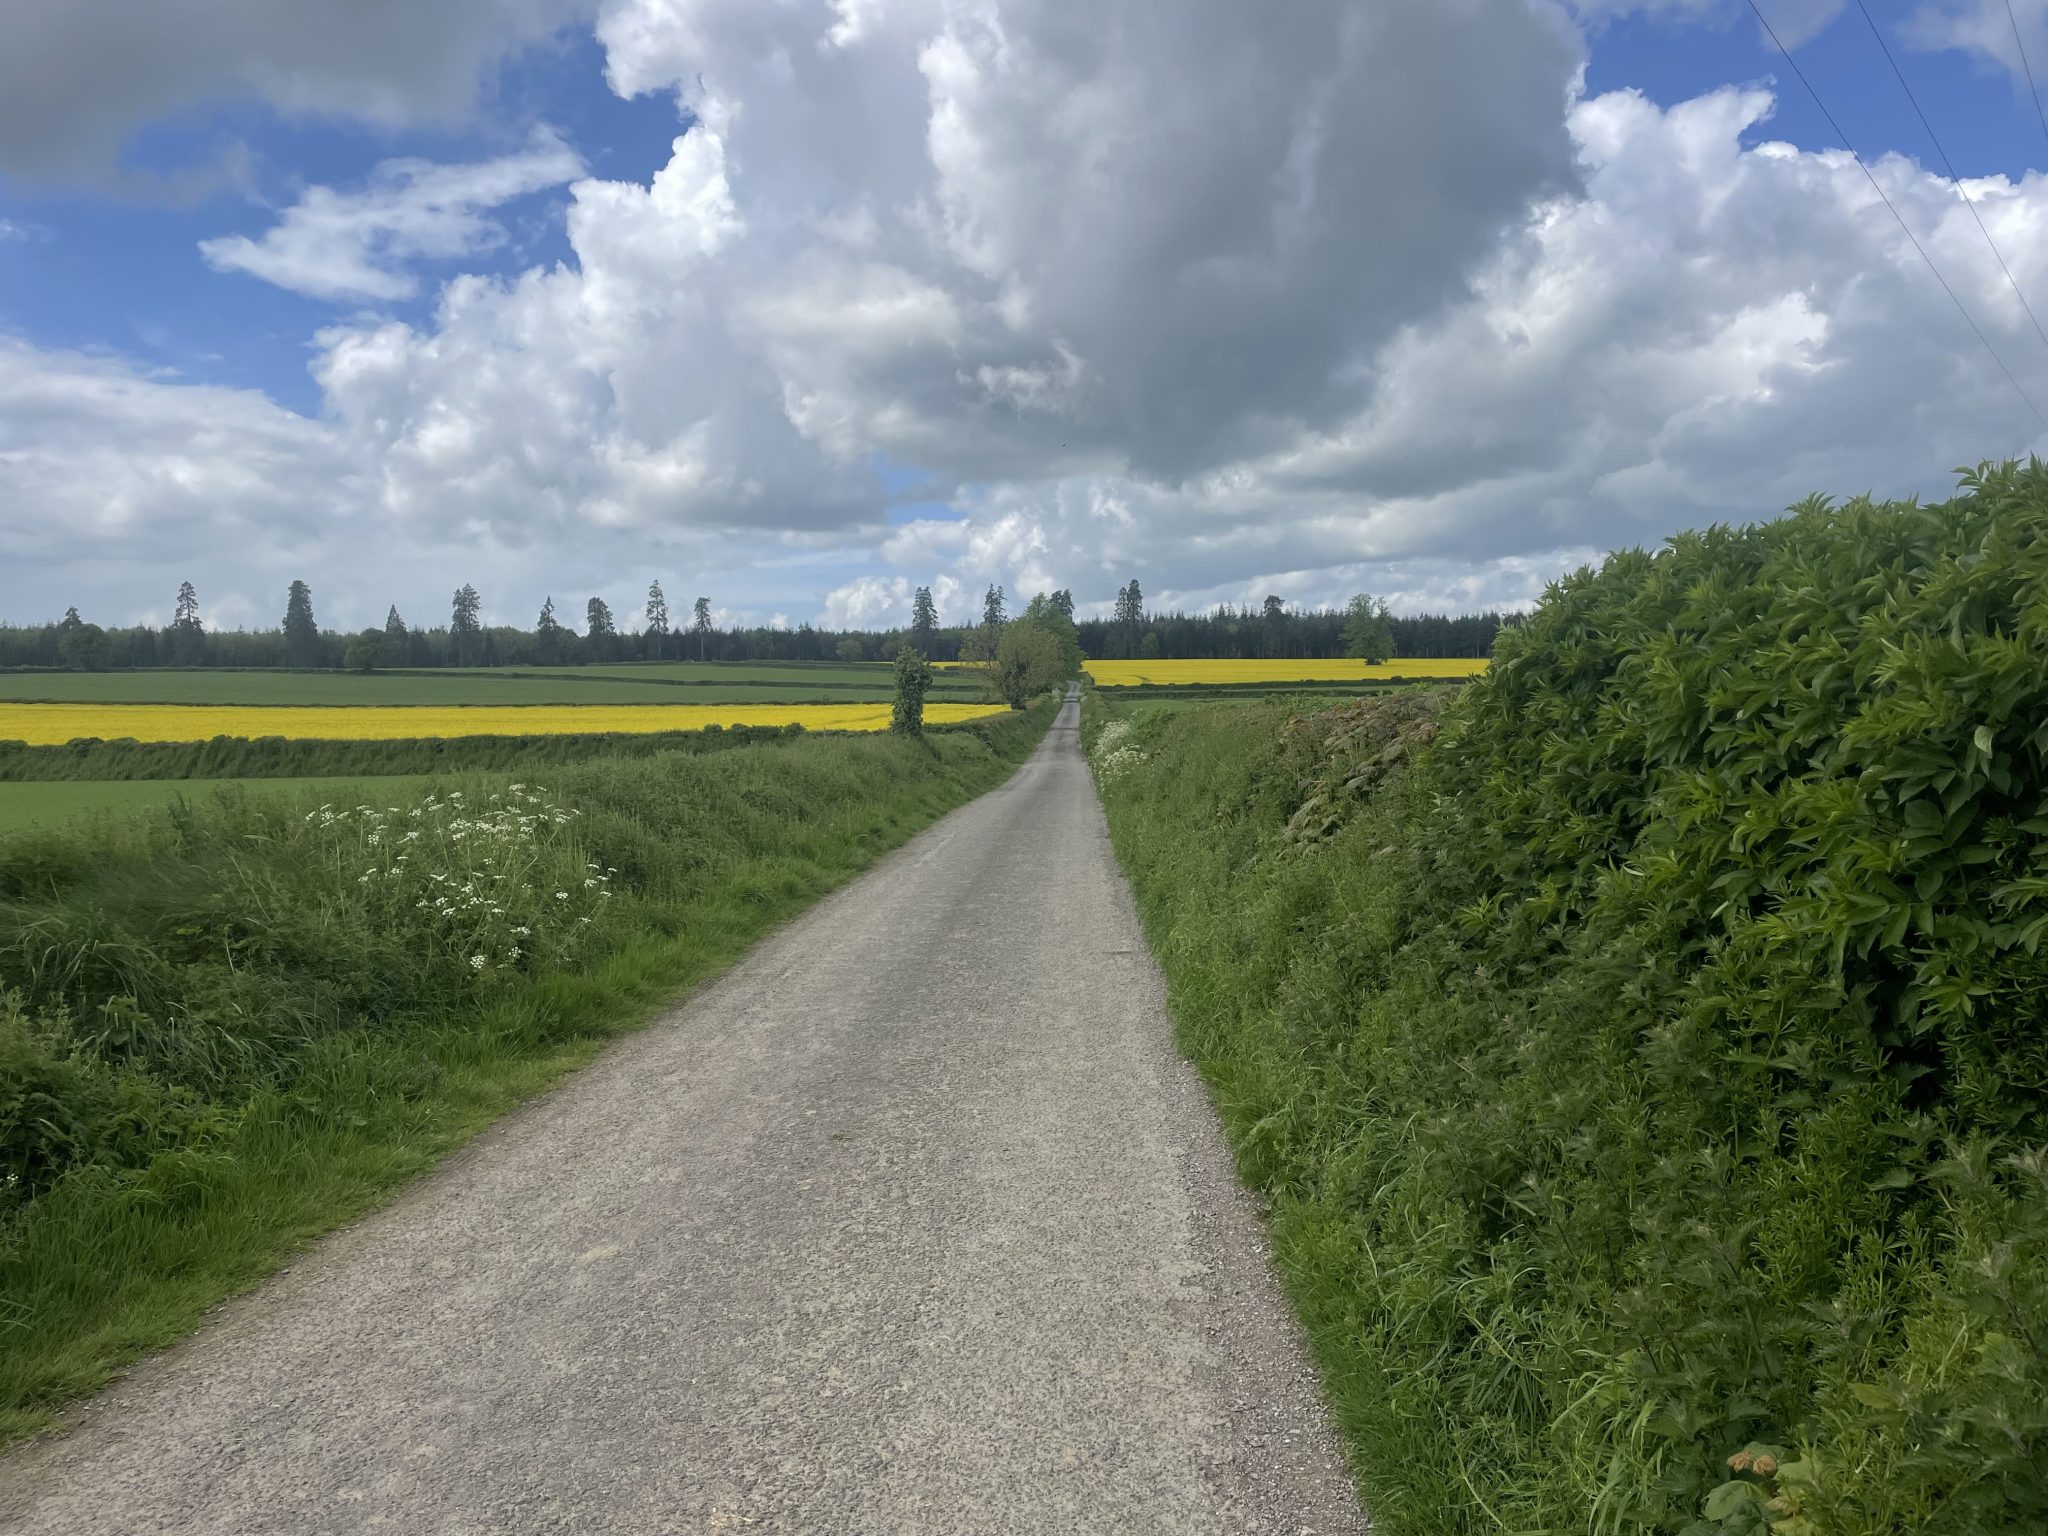 A long straight country road in Ireland surrounded by rapeseed fields